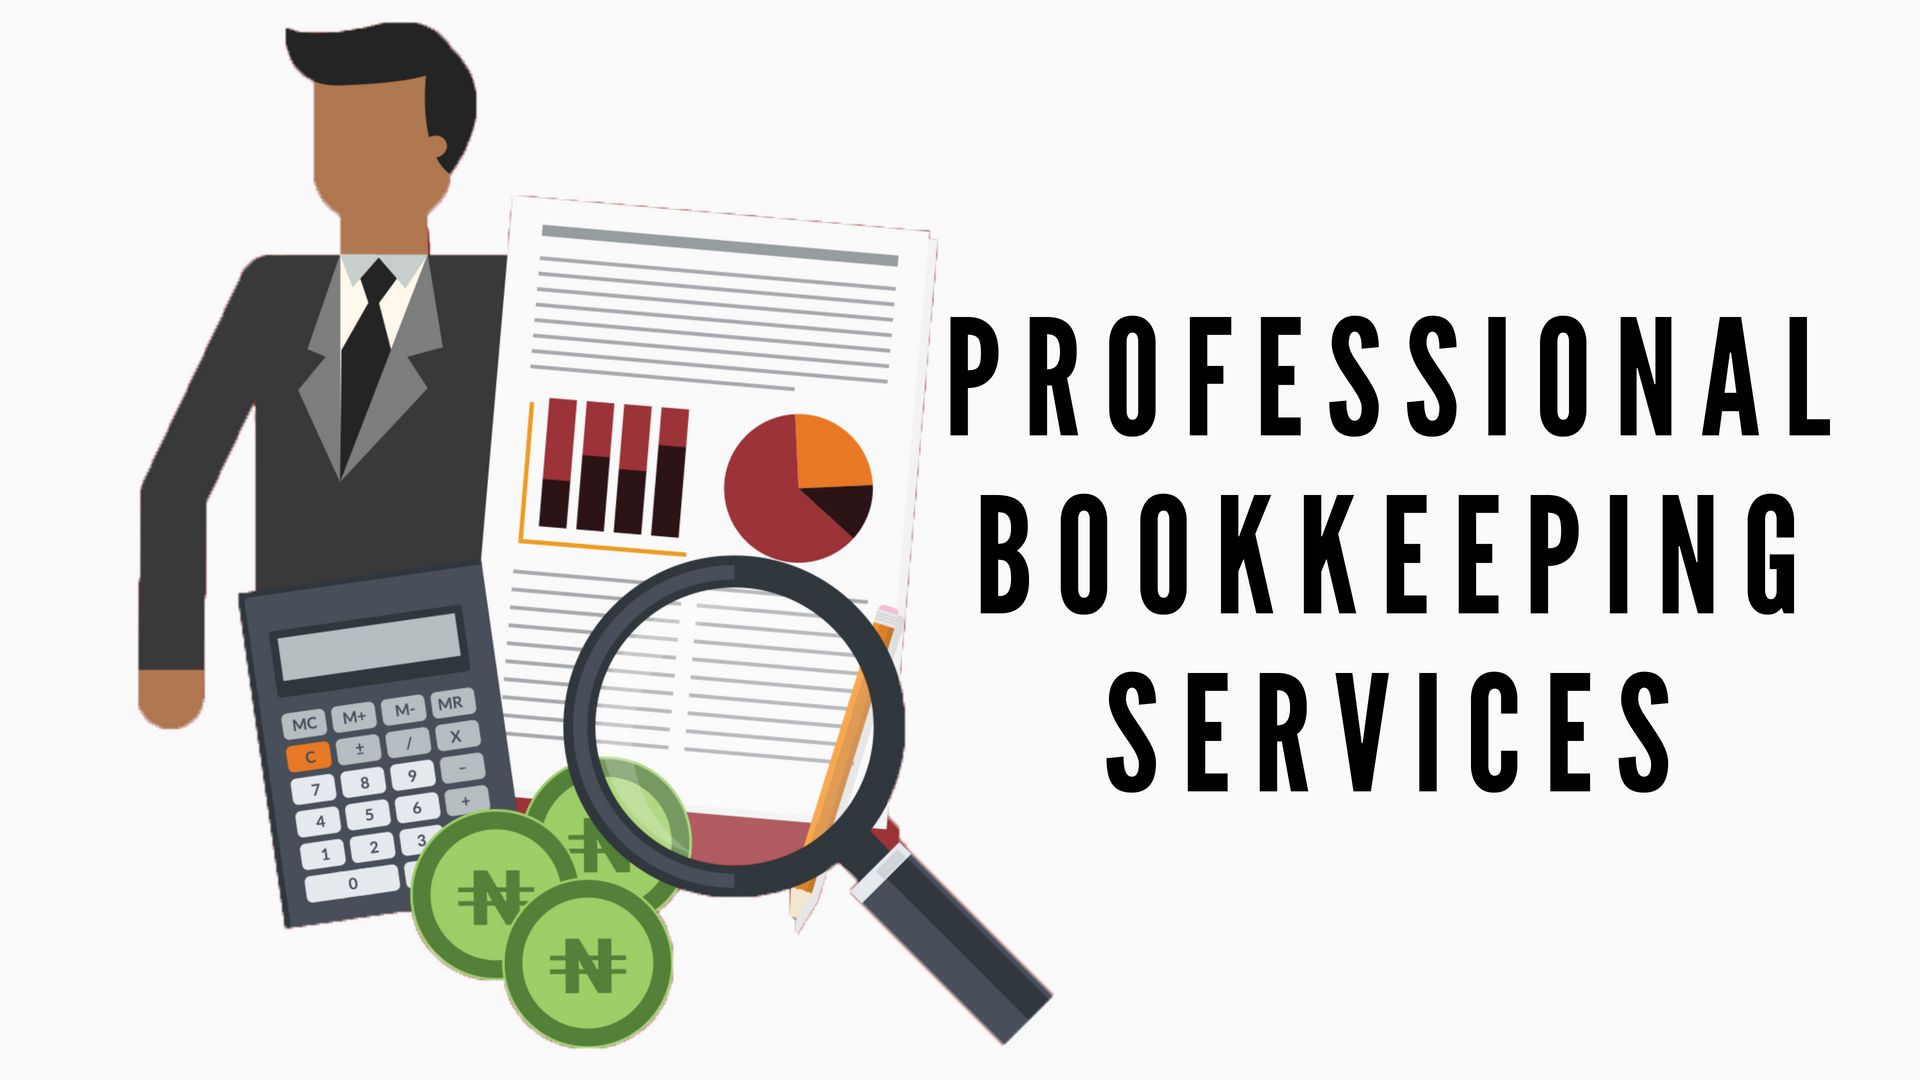 Benefits of Outsourcing Bookkeeping Services